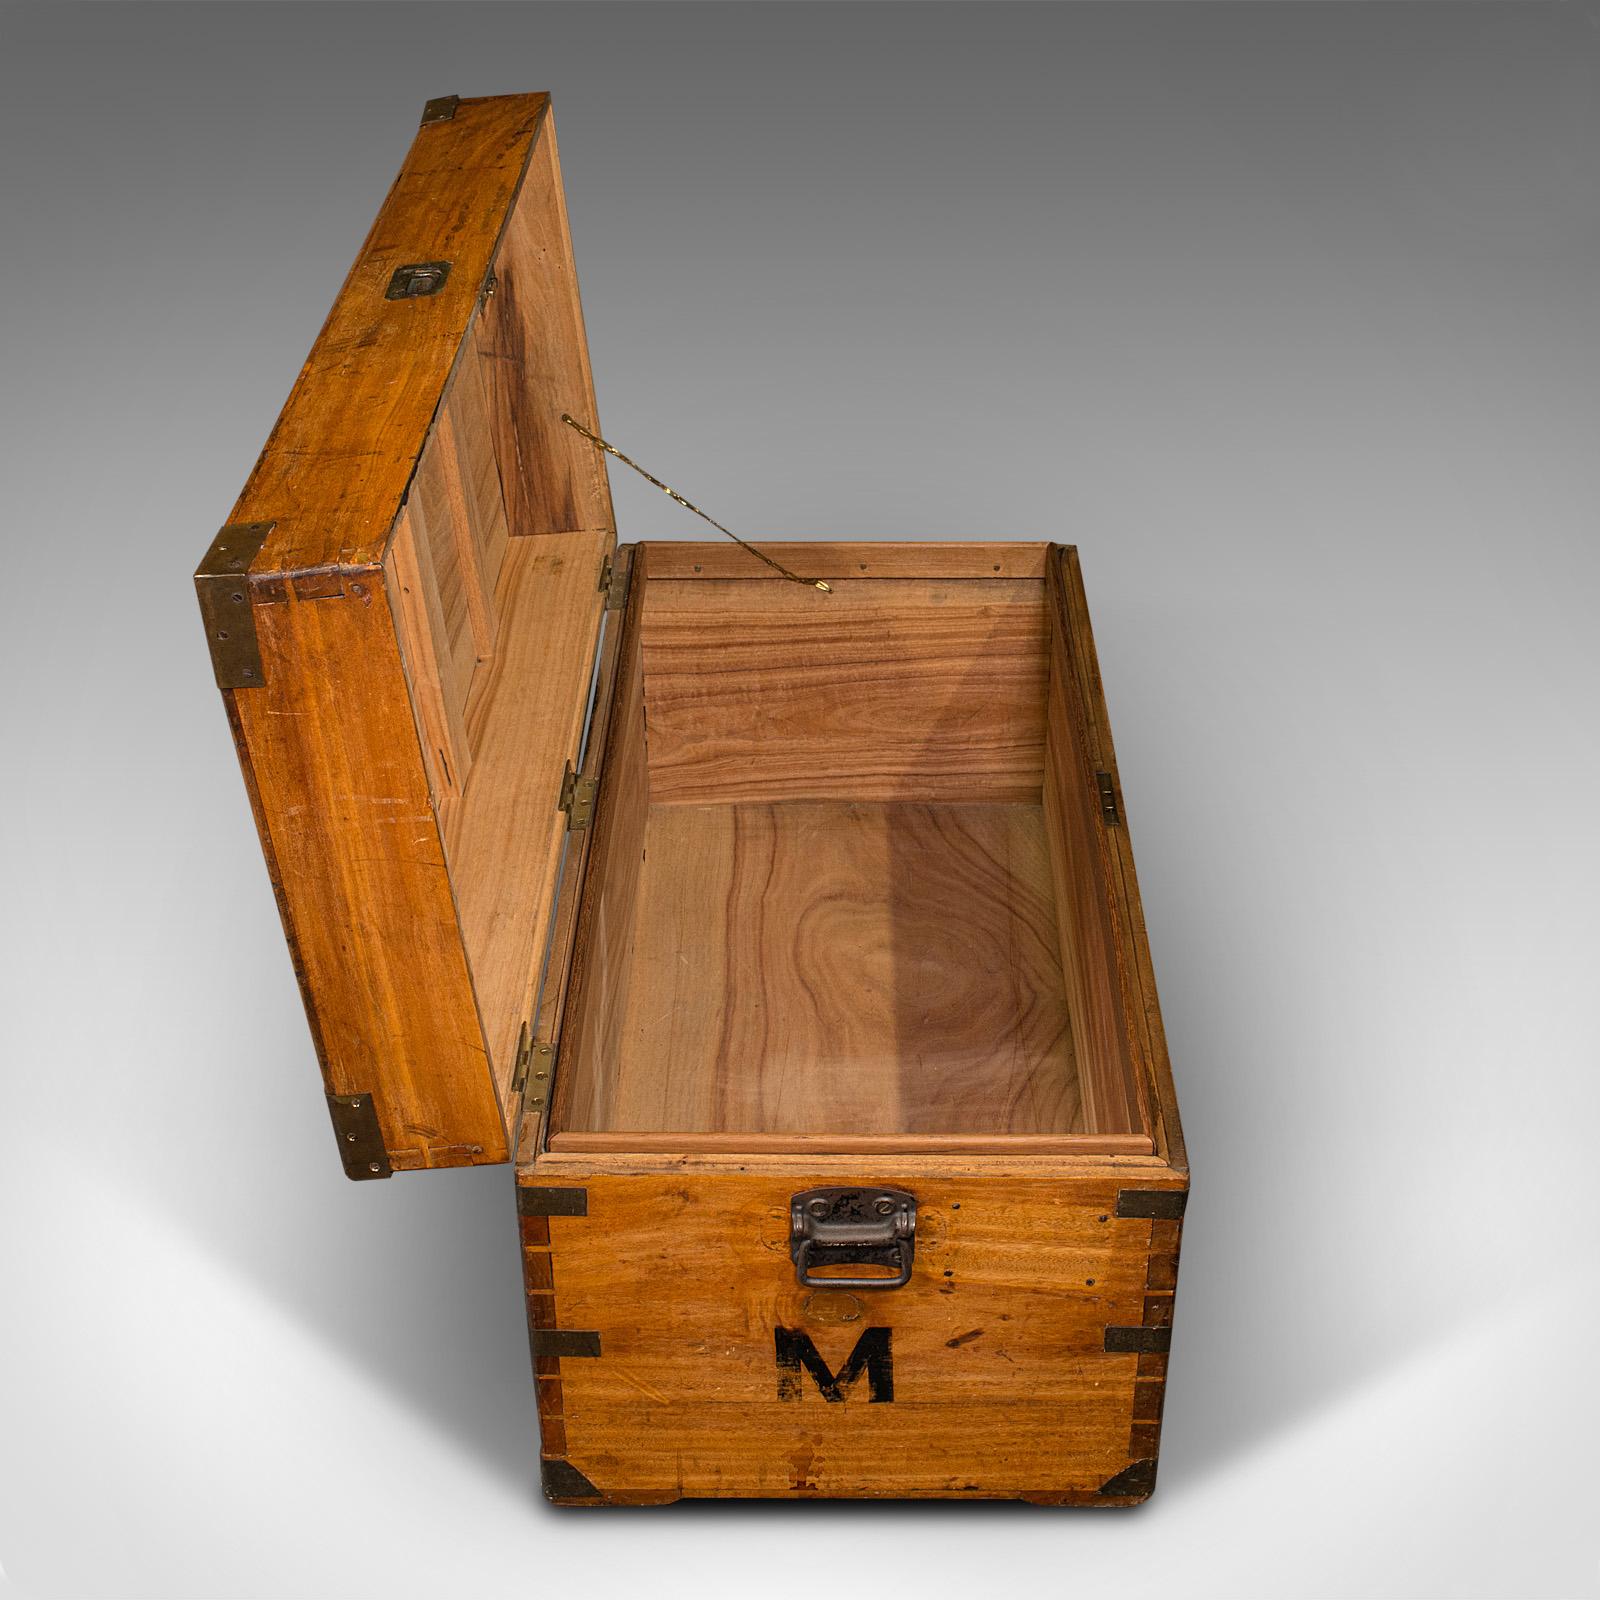 Vintage Campaign Chest, English, Camphorwood, Military Travel Trunk, Circa 1930 For Sale 2